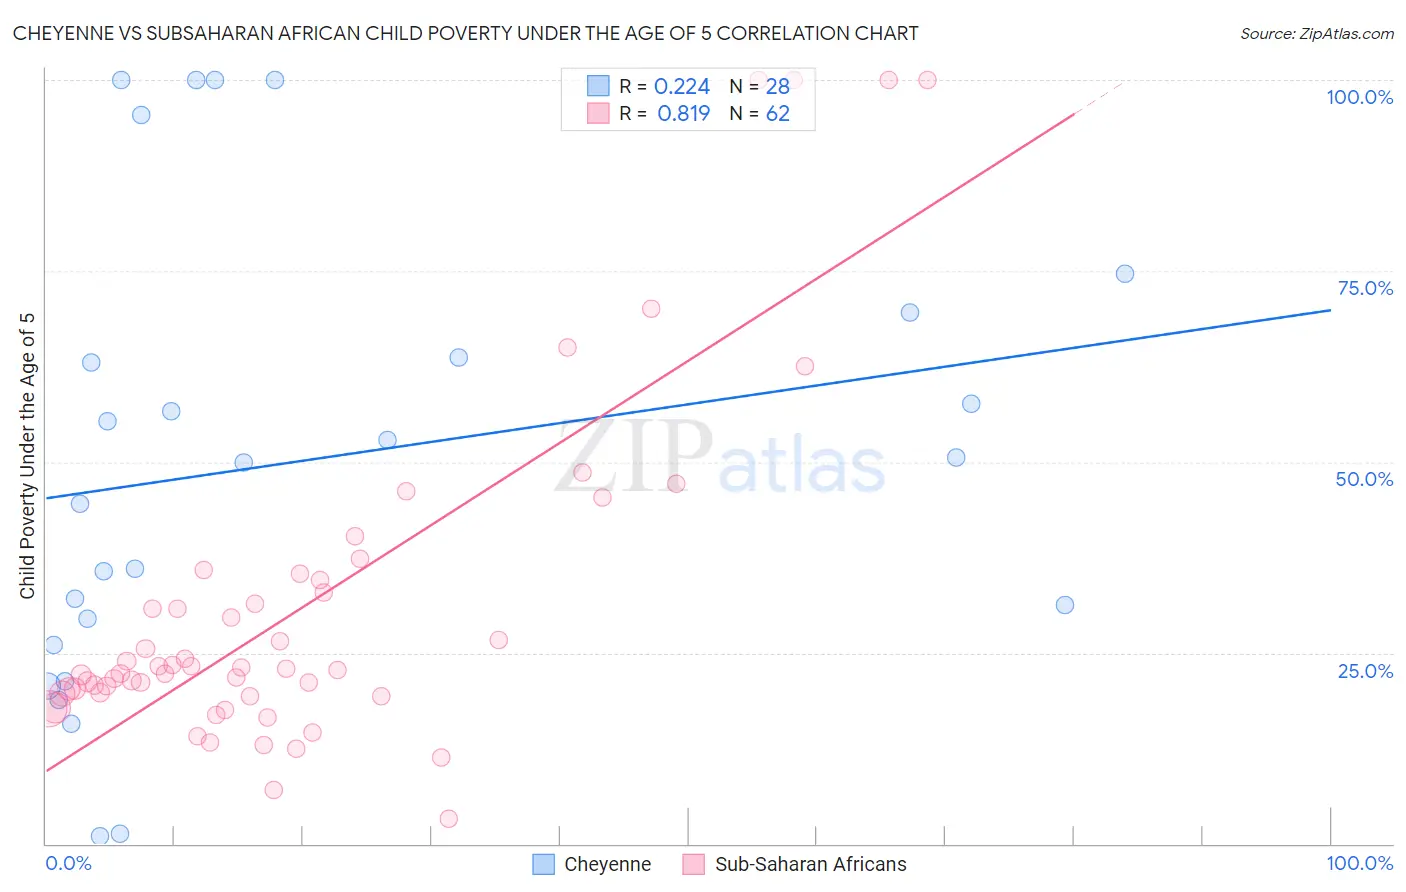 Cheyenne vs Subsaharan African Child Poverty Under the Age of 5